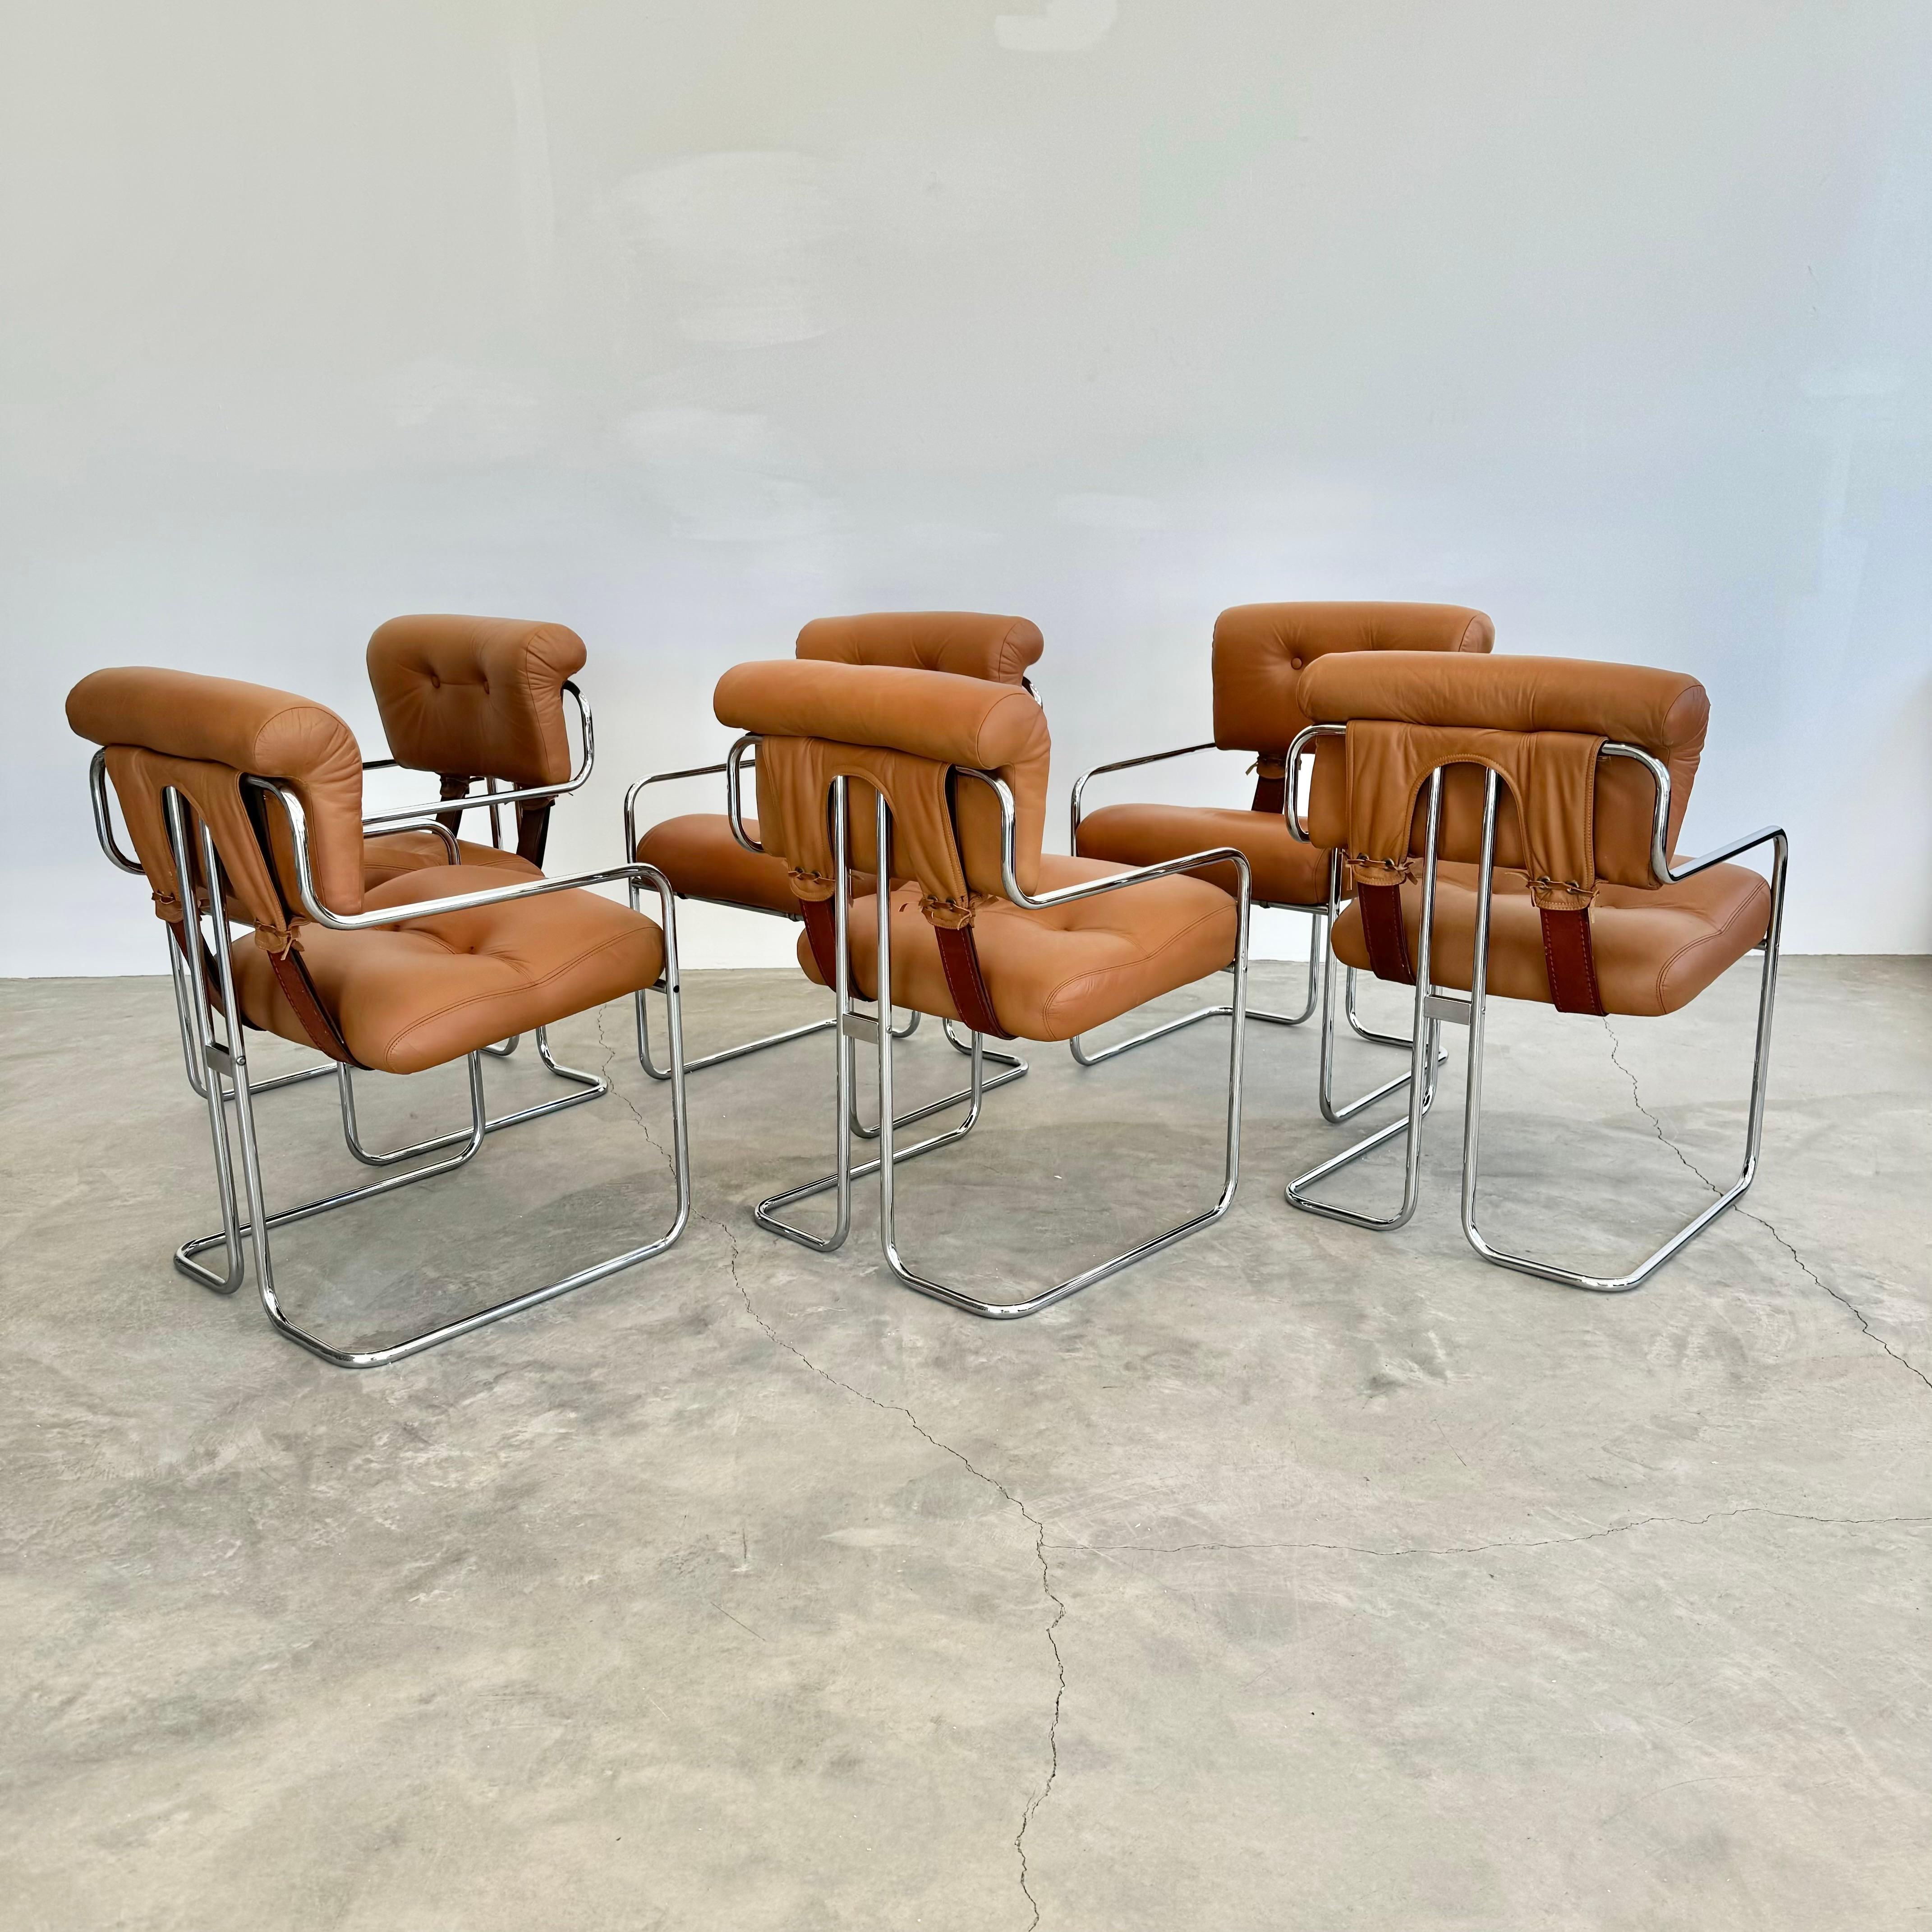 Set of 6 'Tucroma' Chairs in Tan by Guido Faleschini, 1970s Italy For Sale 2